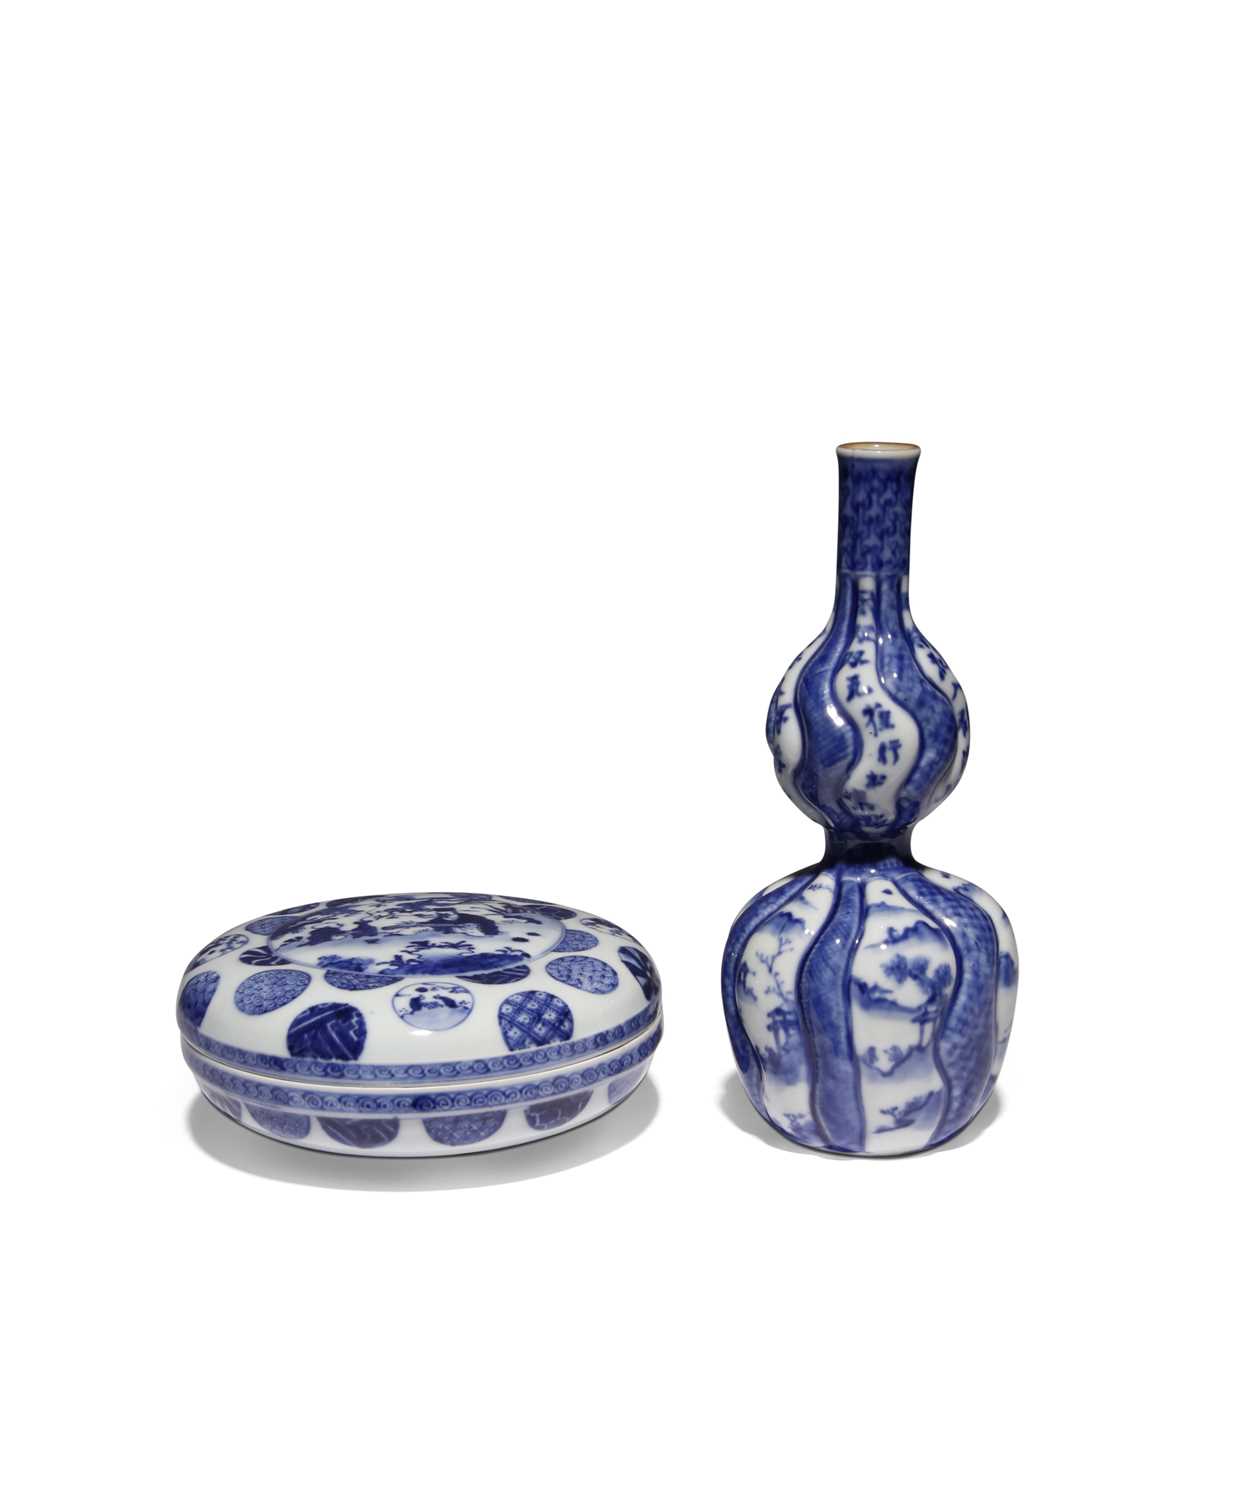 A JAPANESE BLUE AND WHITE BOX AND COVER AND A VASE EDO OR MEIJI, 19TH OR 20TH CENTURY Both pieces